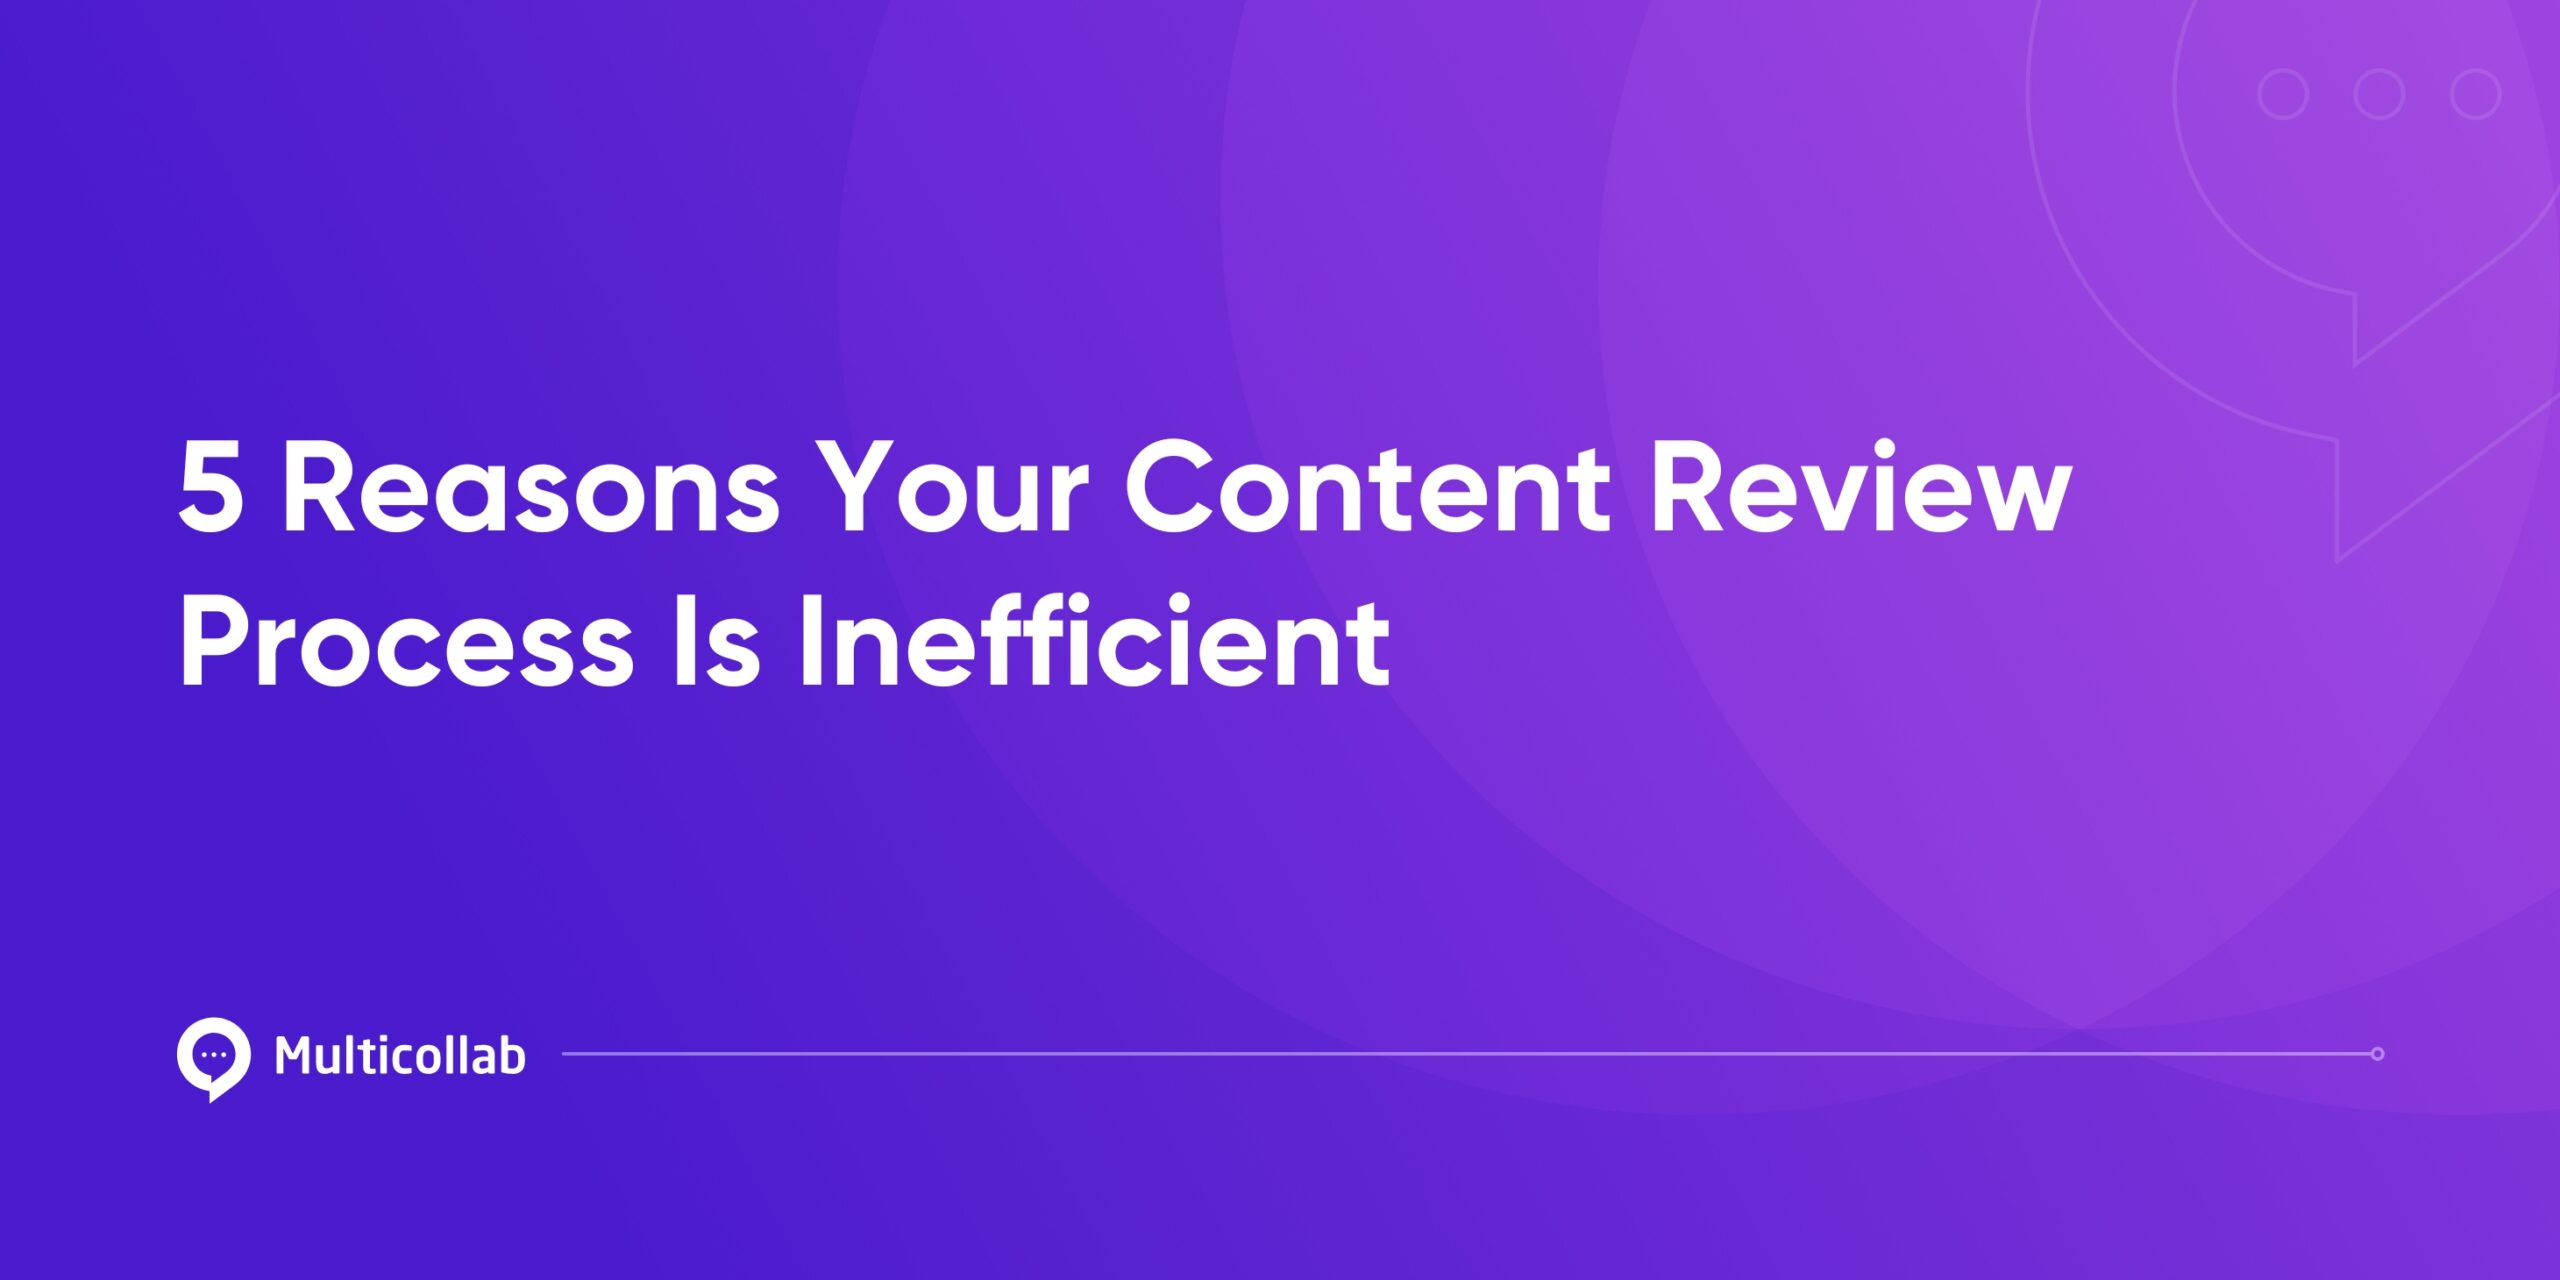 5 Reasons Your Content Review Process Is Inefficient